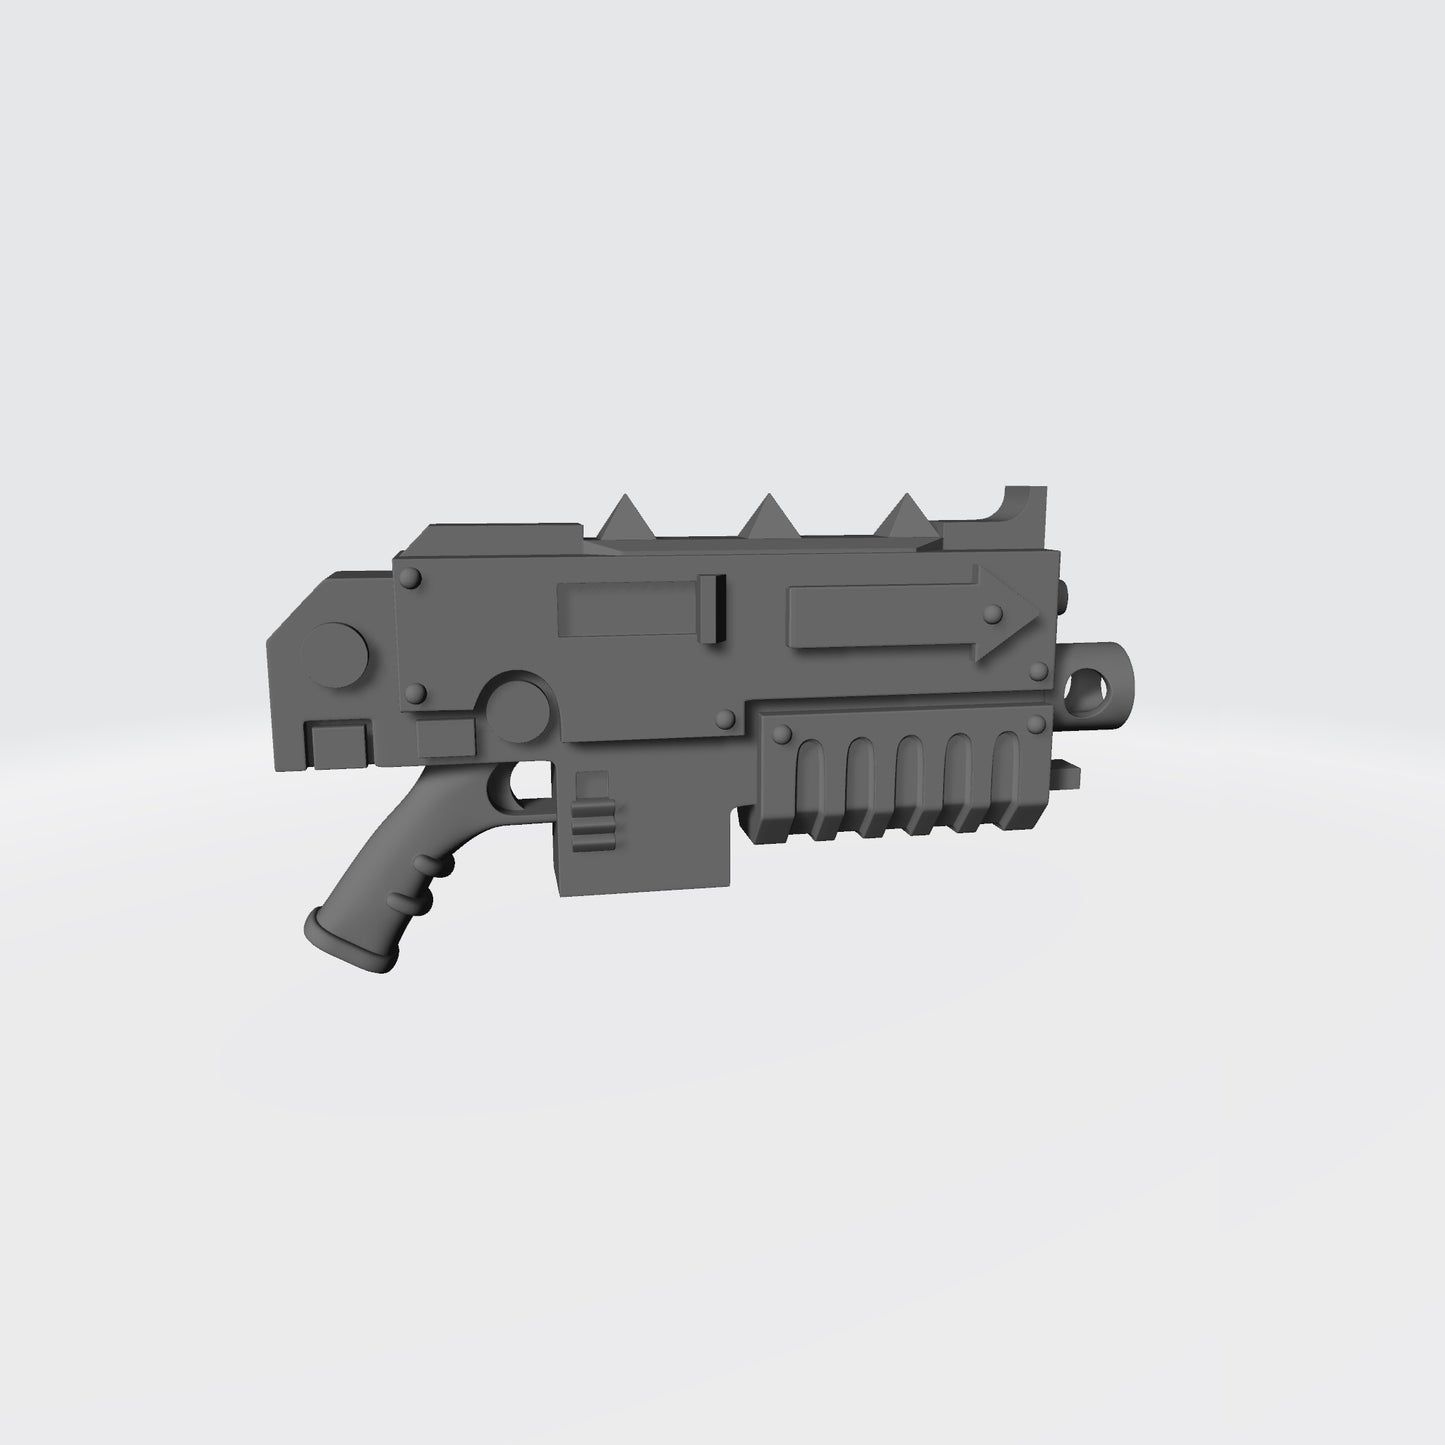 Chaos Bolter with Removable Curved Magazine compatible with JoyToy Space Marine Action Figures